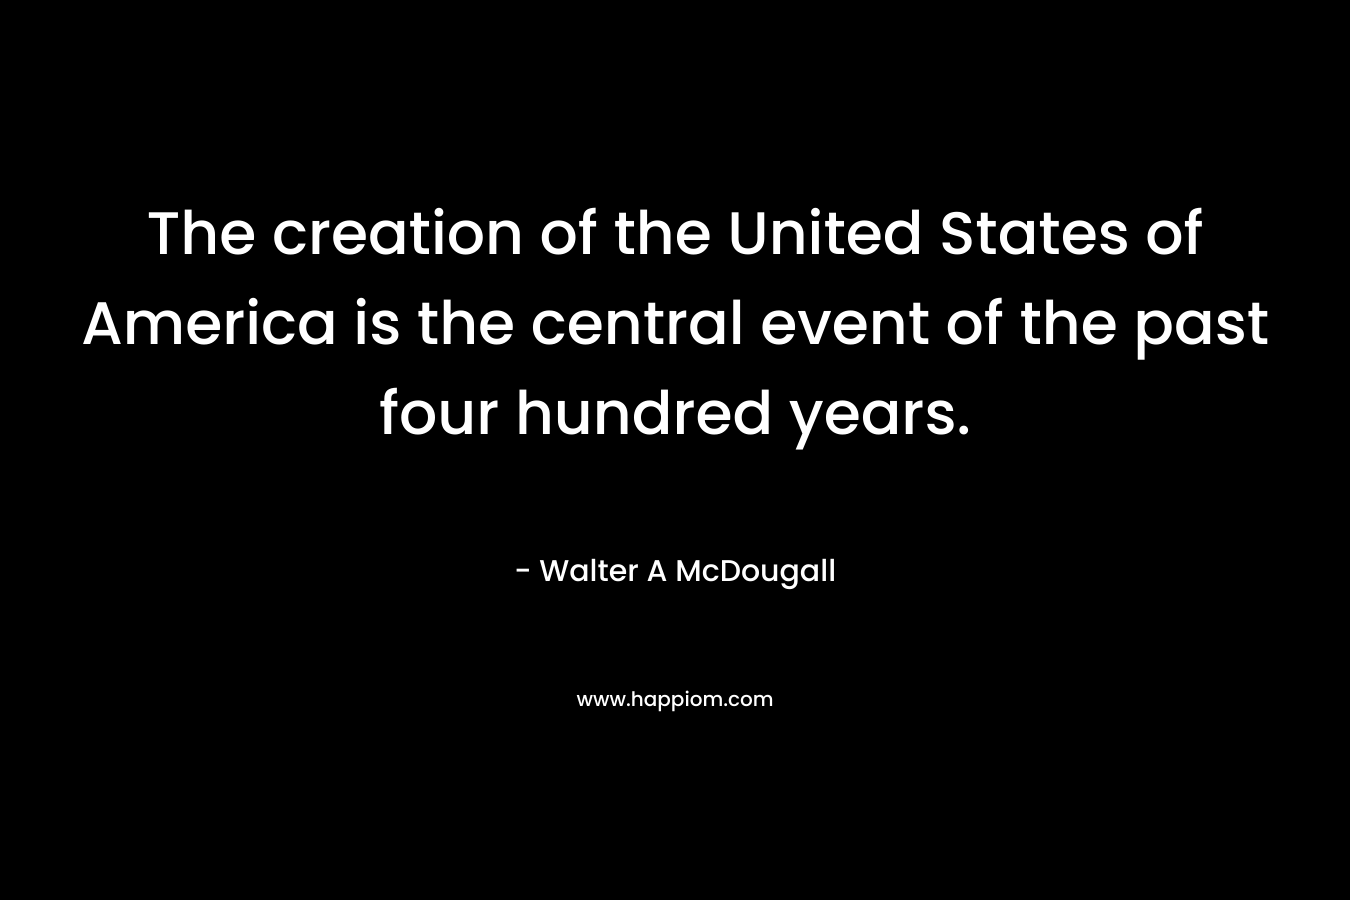 The creation of the United States of America is the central event of the past four hundred years. – Walter A McDougall